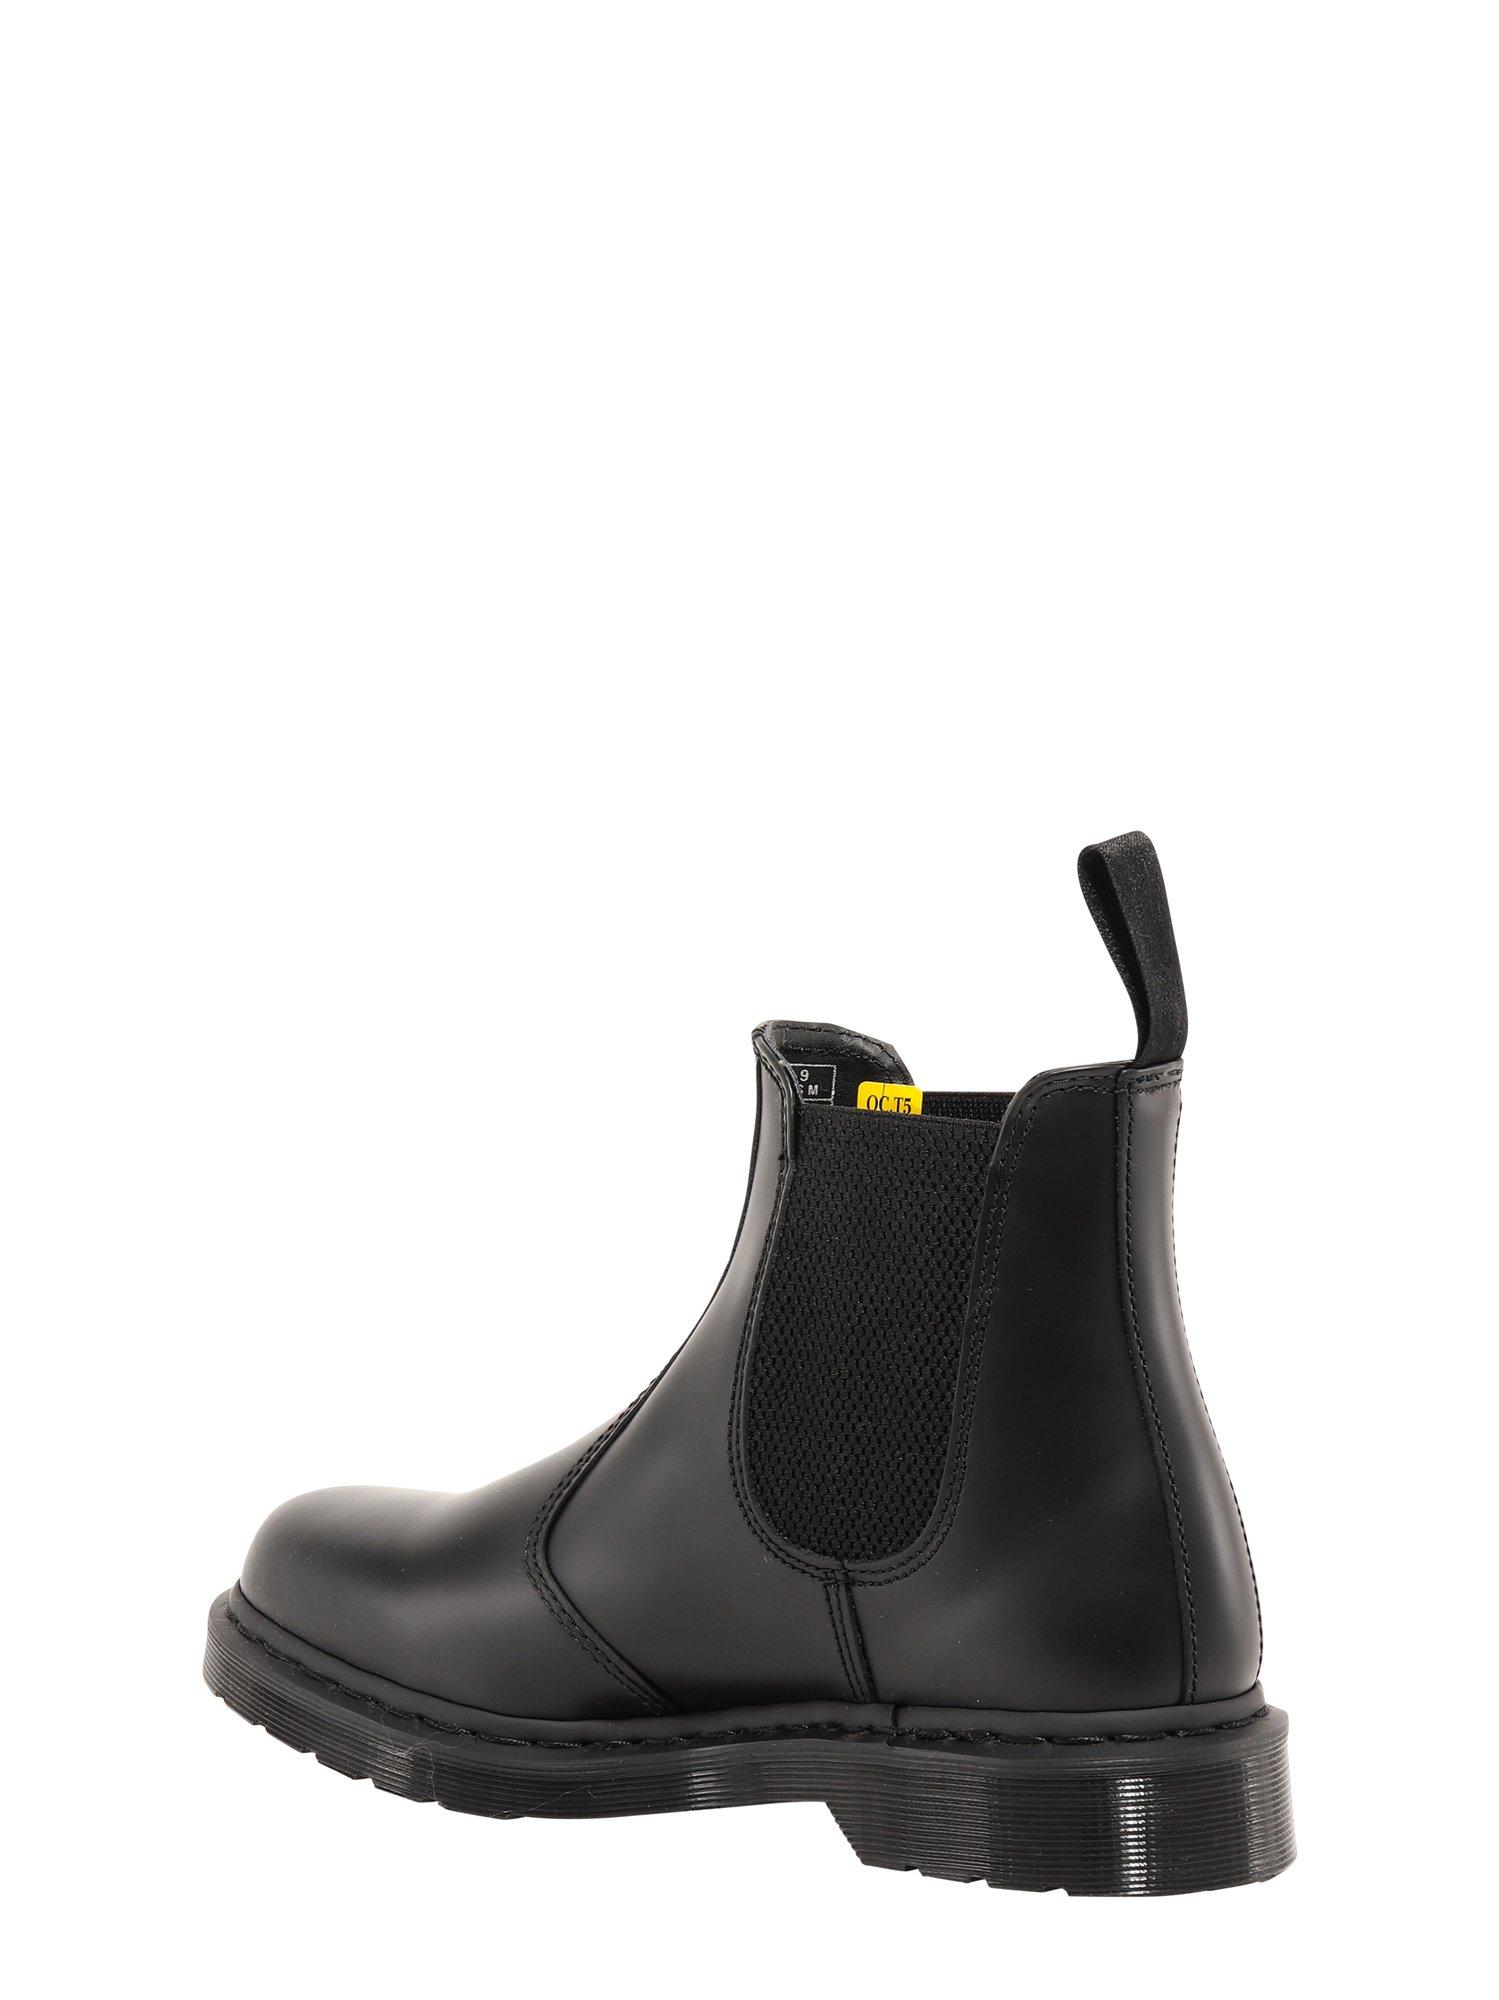 Dr. Martens Leather 2976 Mono Chelsea Boots in Black for Men | Lyst